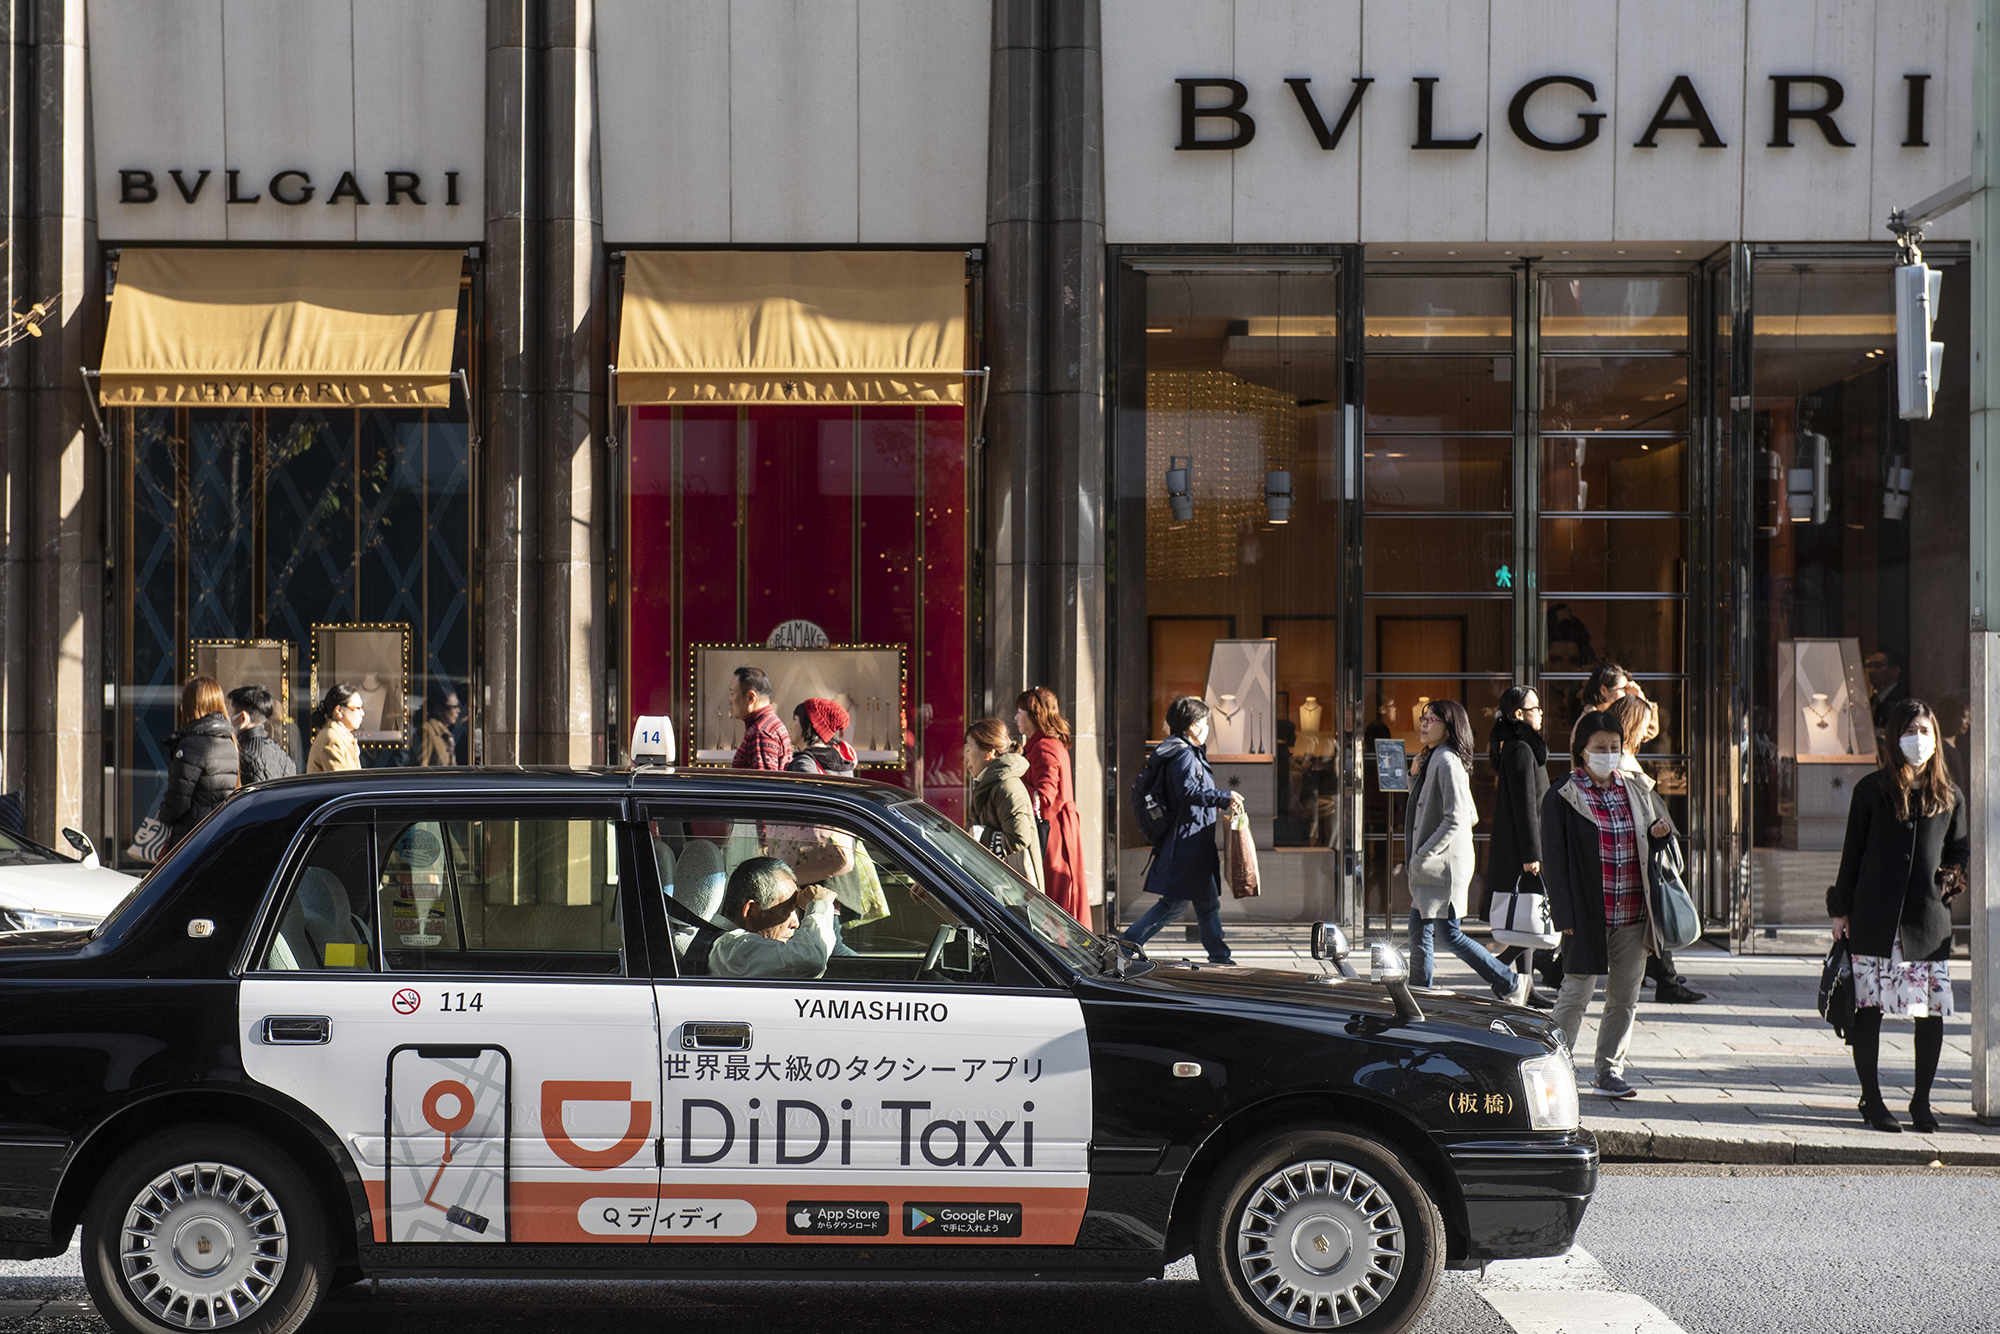 China Reportedly Pressuring Didi To Delist From NYSE